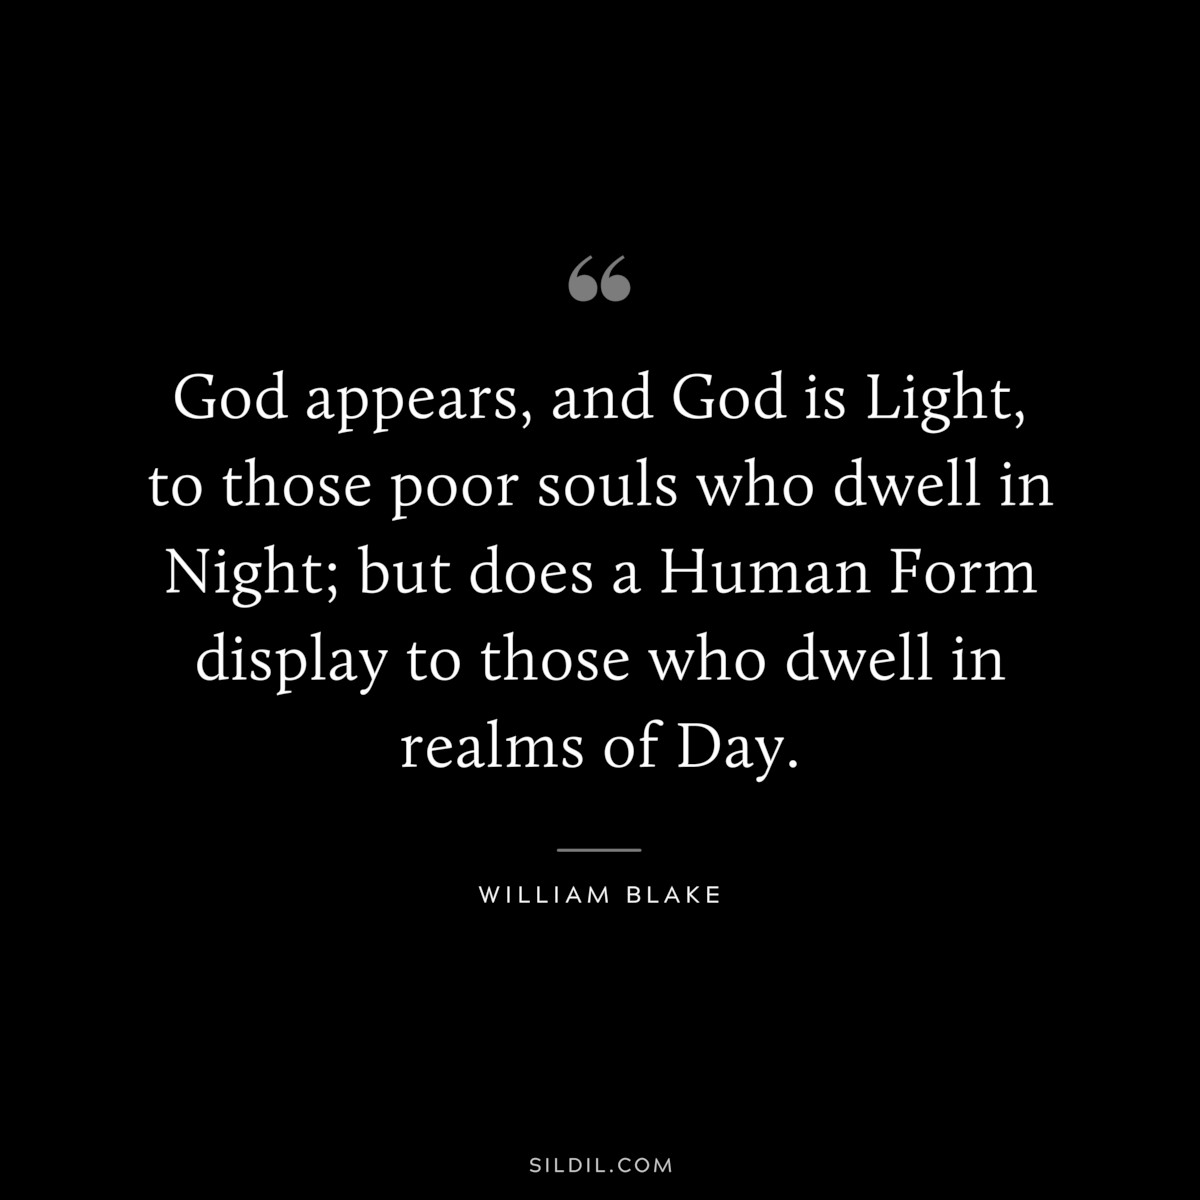 God appears, and God is Light, to those poor souls who dwell in Night; but does a Human Form display to those who dwell in realms of Day. ― William Blake